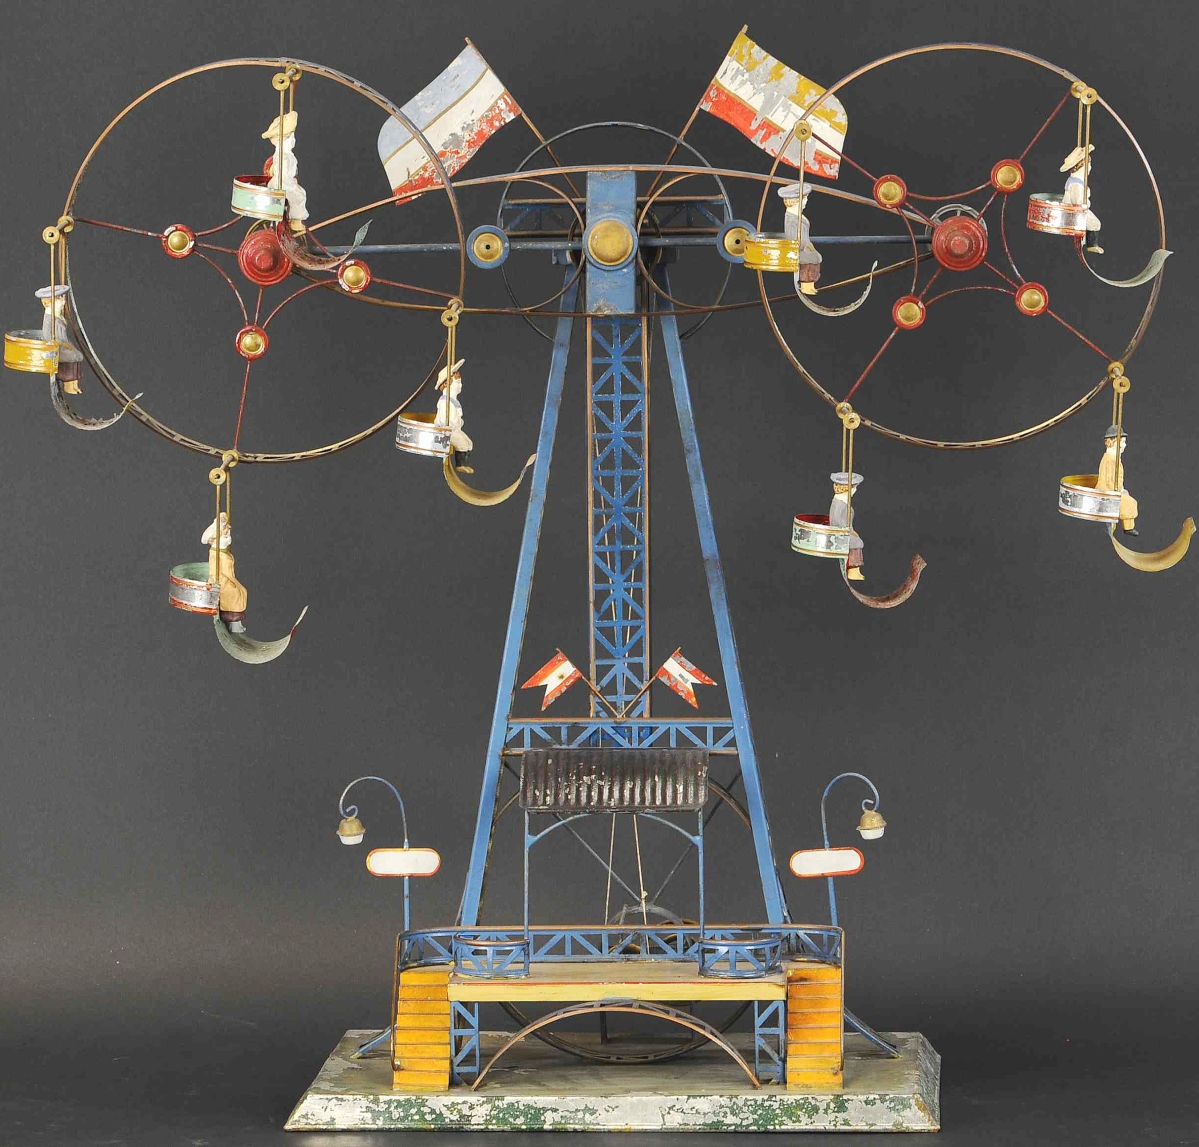 Rising to $132,000 was a Mohr & Krauss double Ferris wheel. Bertoia said they had much interest from Europe on the piece and it sold to a European collector. It was the second highest price in the sale and probably the only example ever auctioned to date. The Schroeders found the work in a barber shop window in Pennsylvania. The firm wrote, “Aaron left with a haircut and Abby had a Double Ferris Wheel in her arms!”